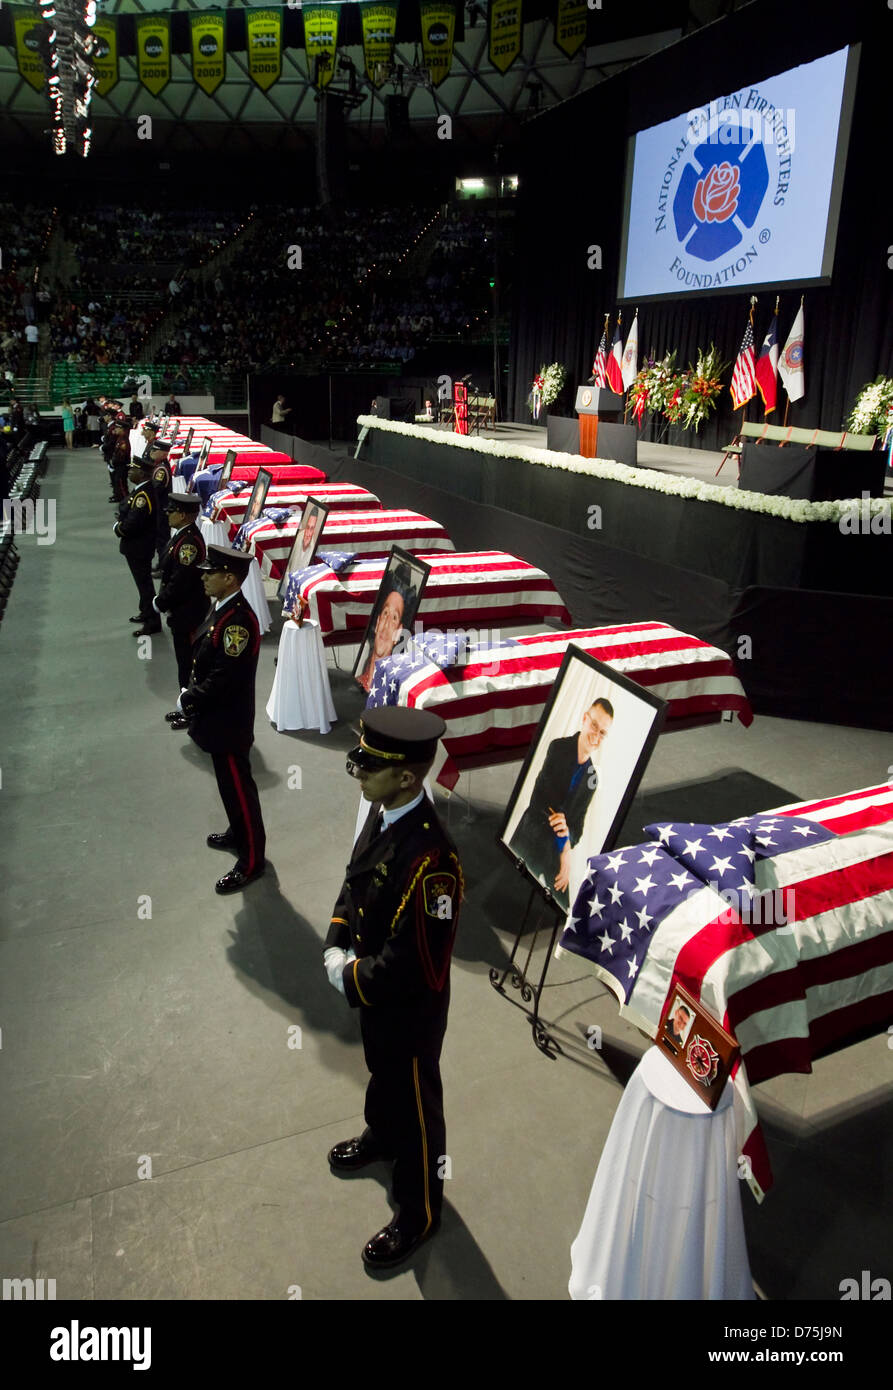 Firefighters stand guard in front of caskets covered in US flags during memorial service in Waco, Texas Stock Photo